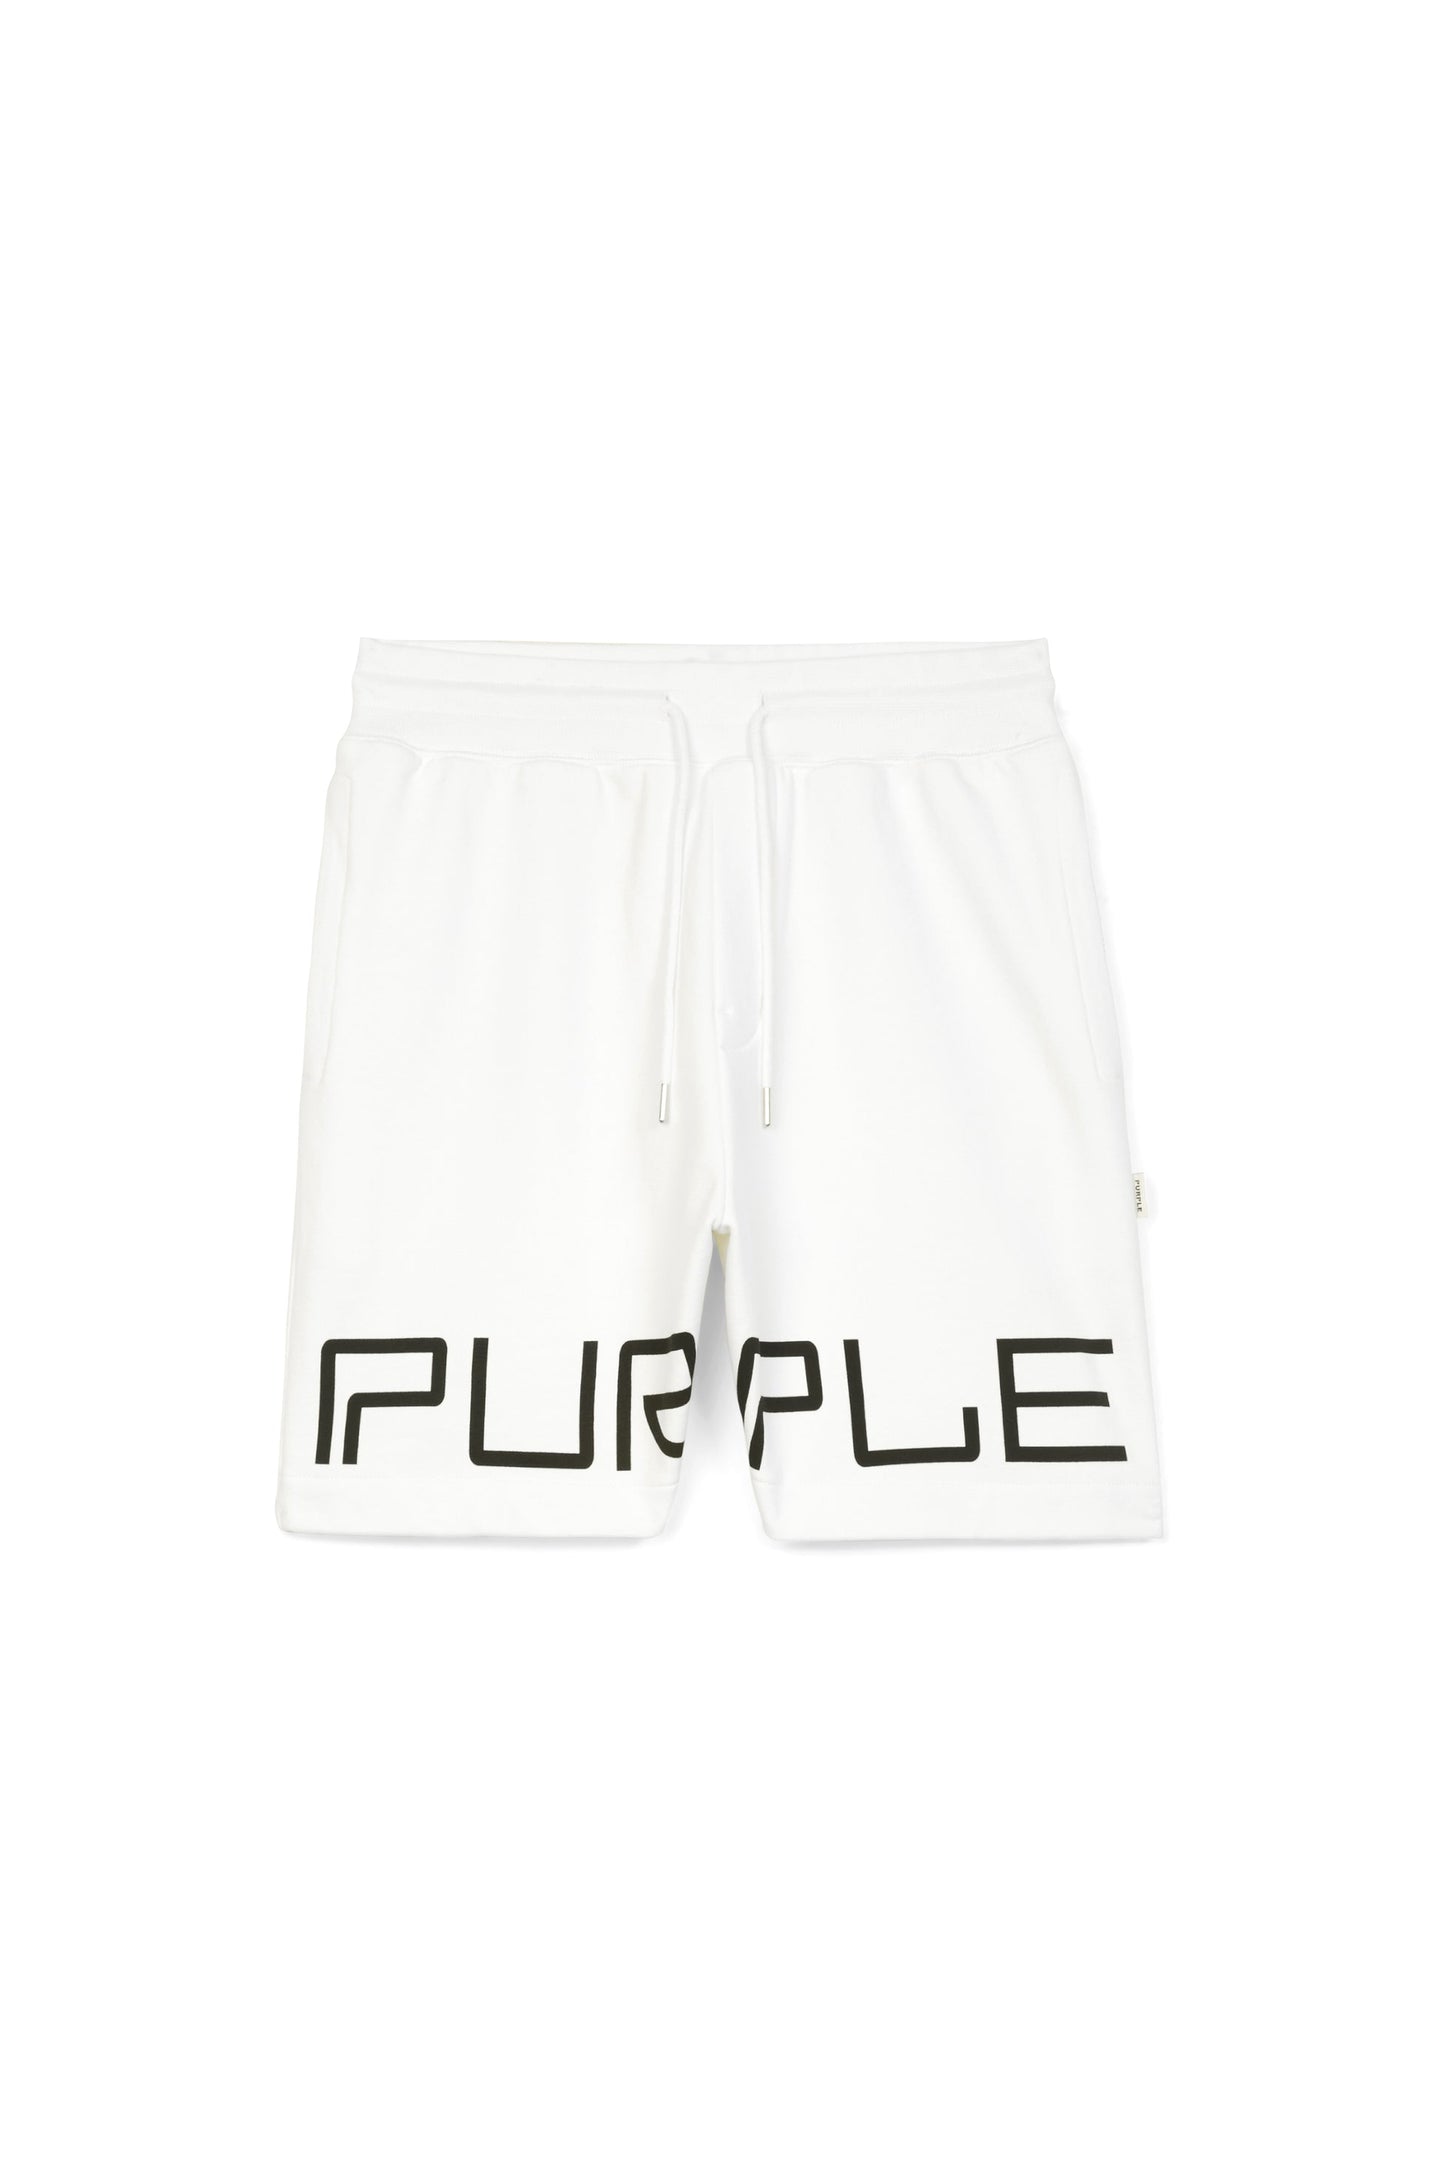 P413 Relaxed Fit Short - French Terry Wordmark Coconut Milk - Clique Apparel